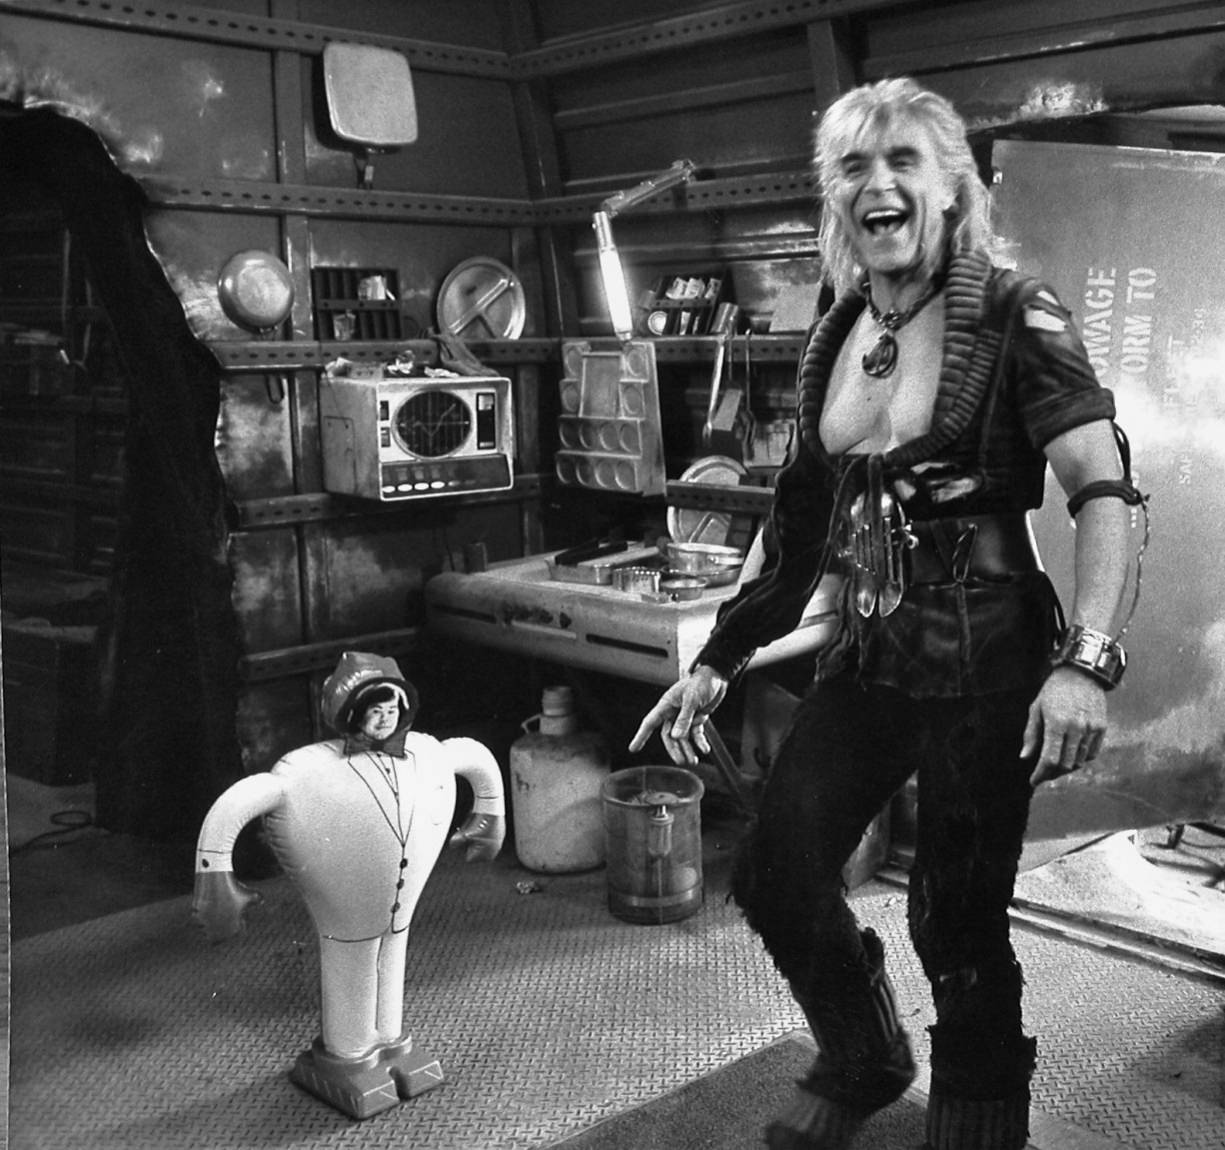 Ricardo Montalban reacting to a prank right before a scene during filming of Star Trek II: The Wrath of Khan in 1982.